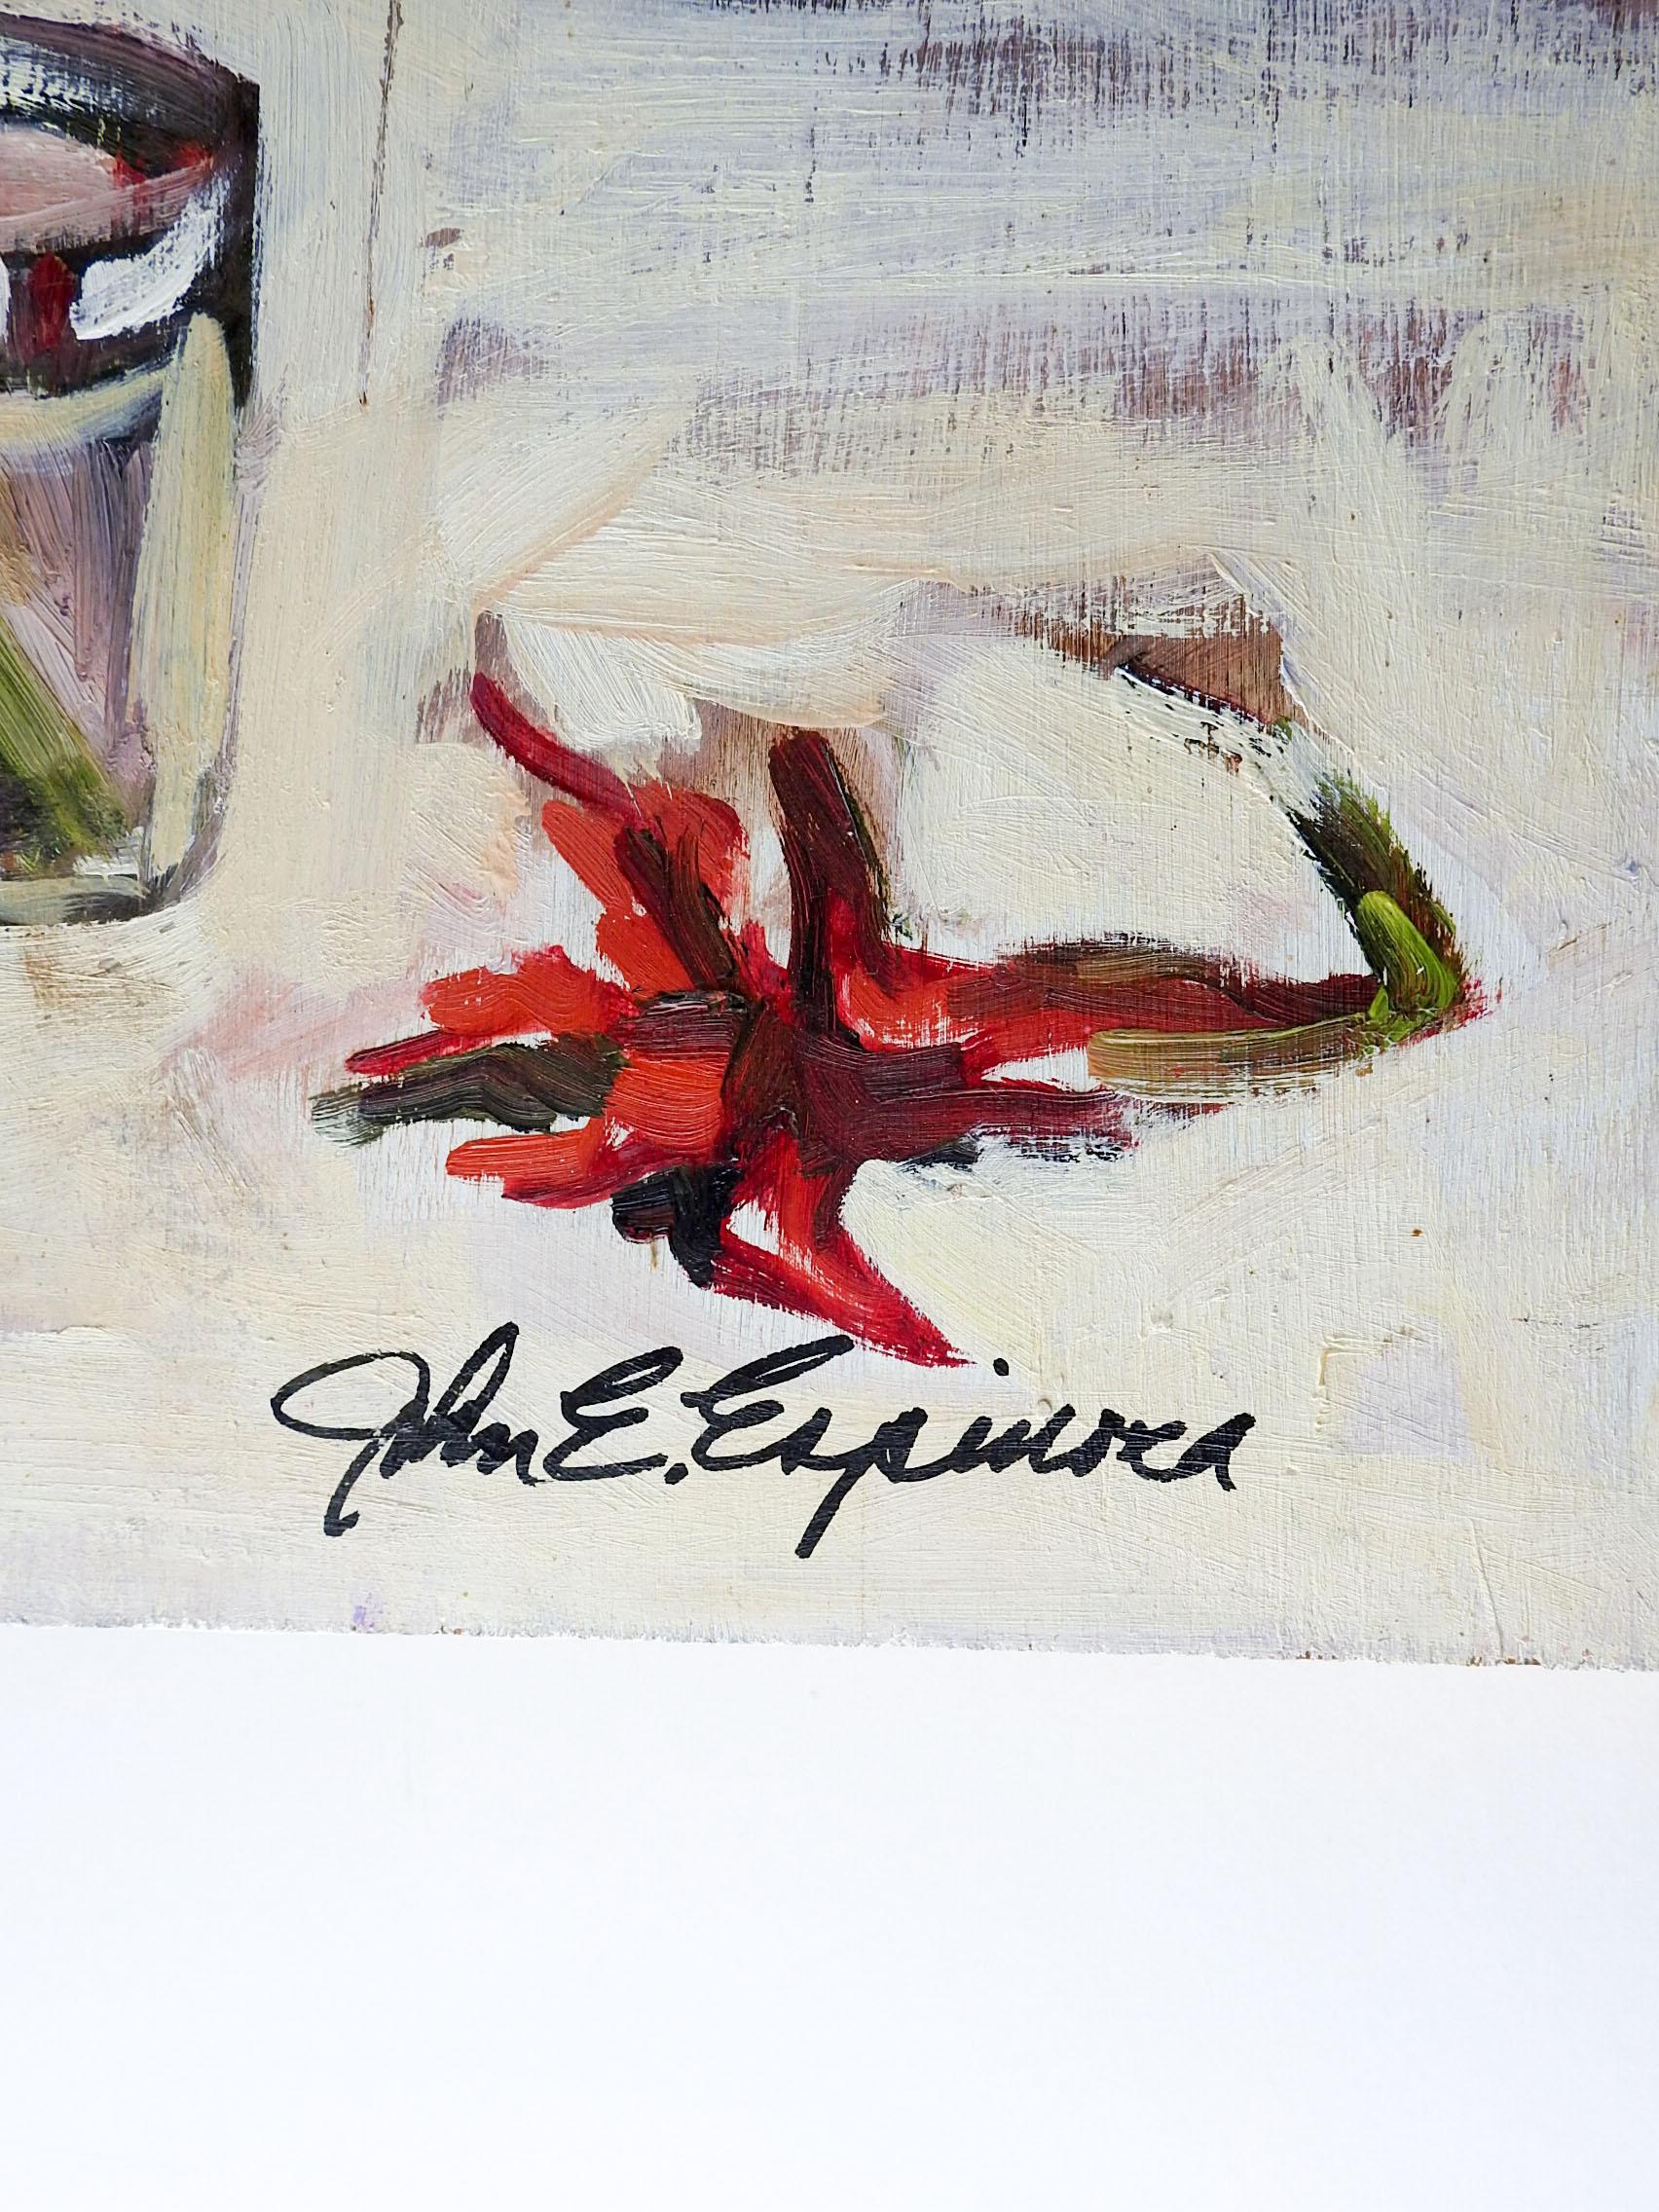 Oil on wood panel impressionist still life with red Asian Lilies by John Espinosa. Signed lower right. Panel mounted on sturdy wood backing so it can be hung without a frame. Edge wear, few scratches to paint surface.